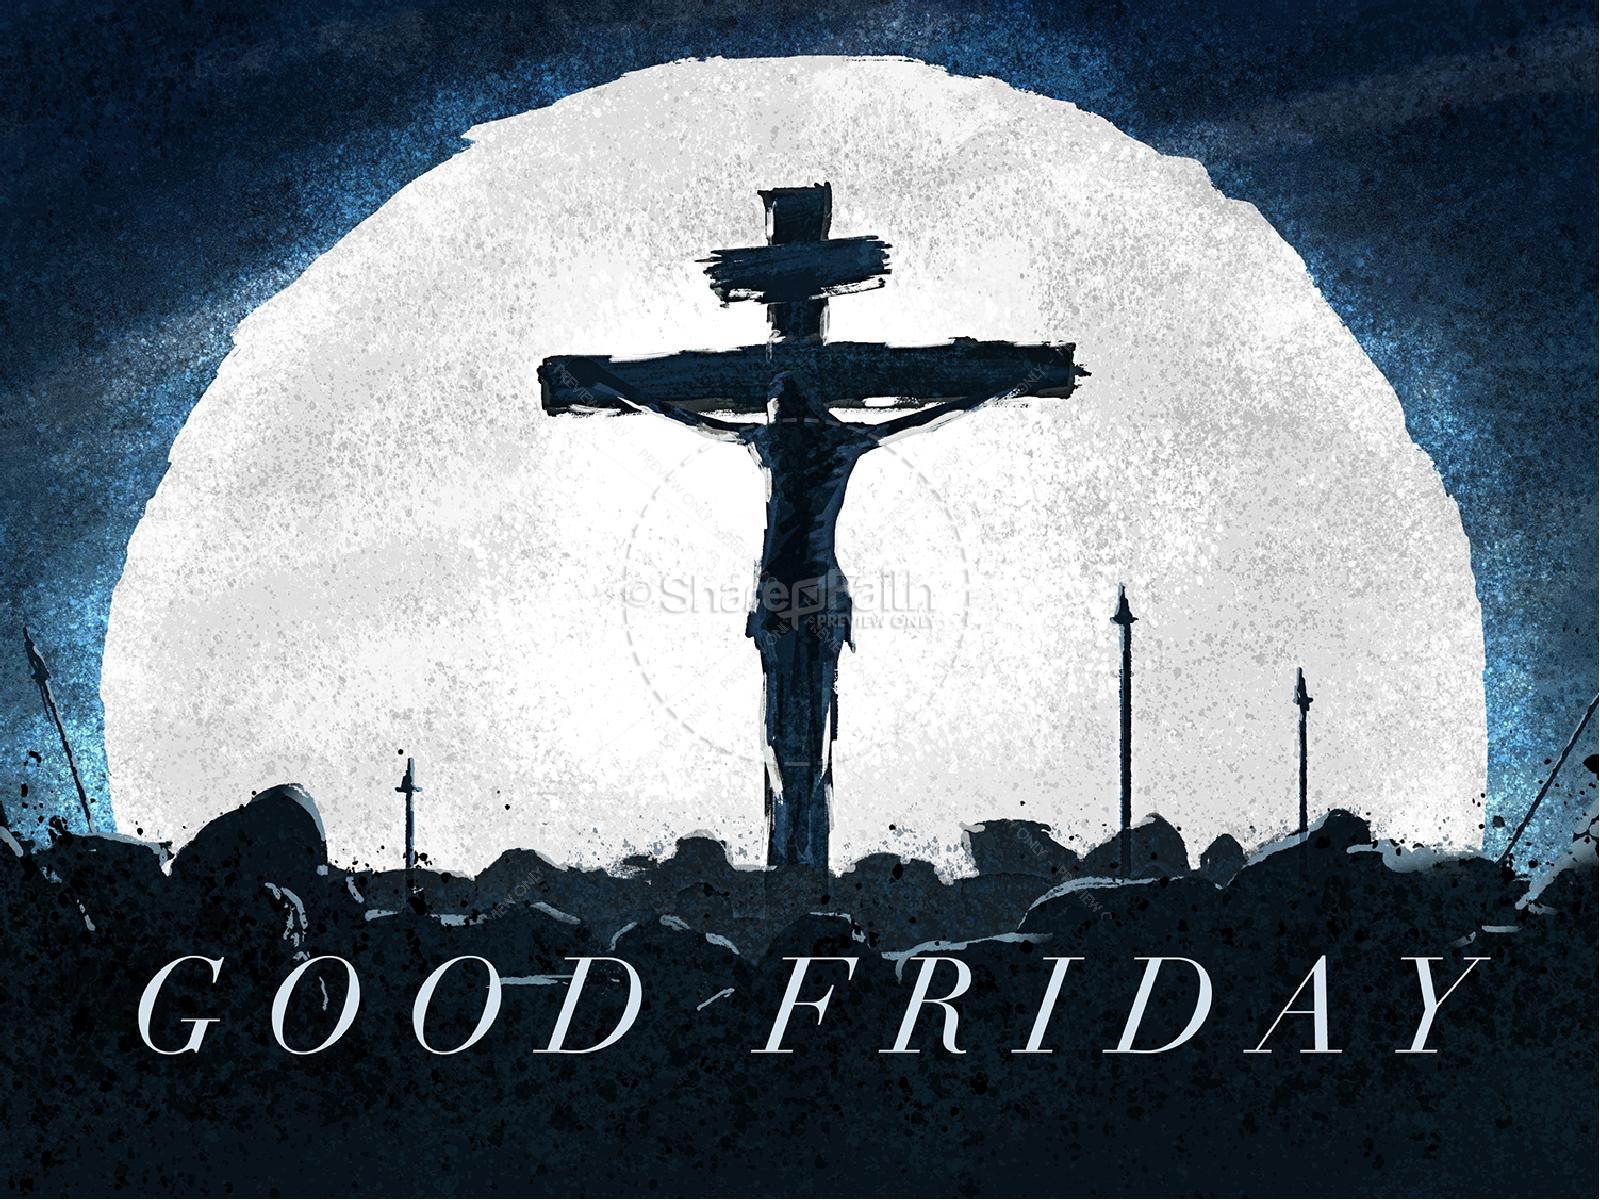 Good Friday Crucifixion Church PowerPoint  Easter Sunday Resurrection   Graphic